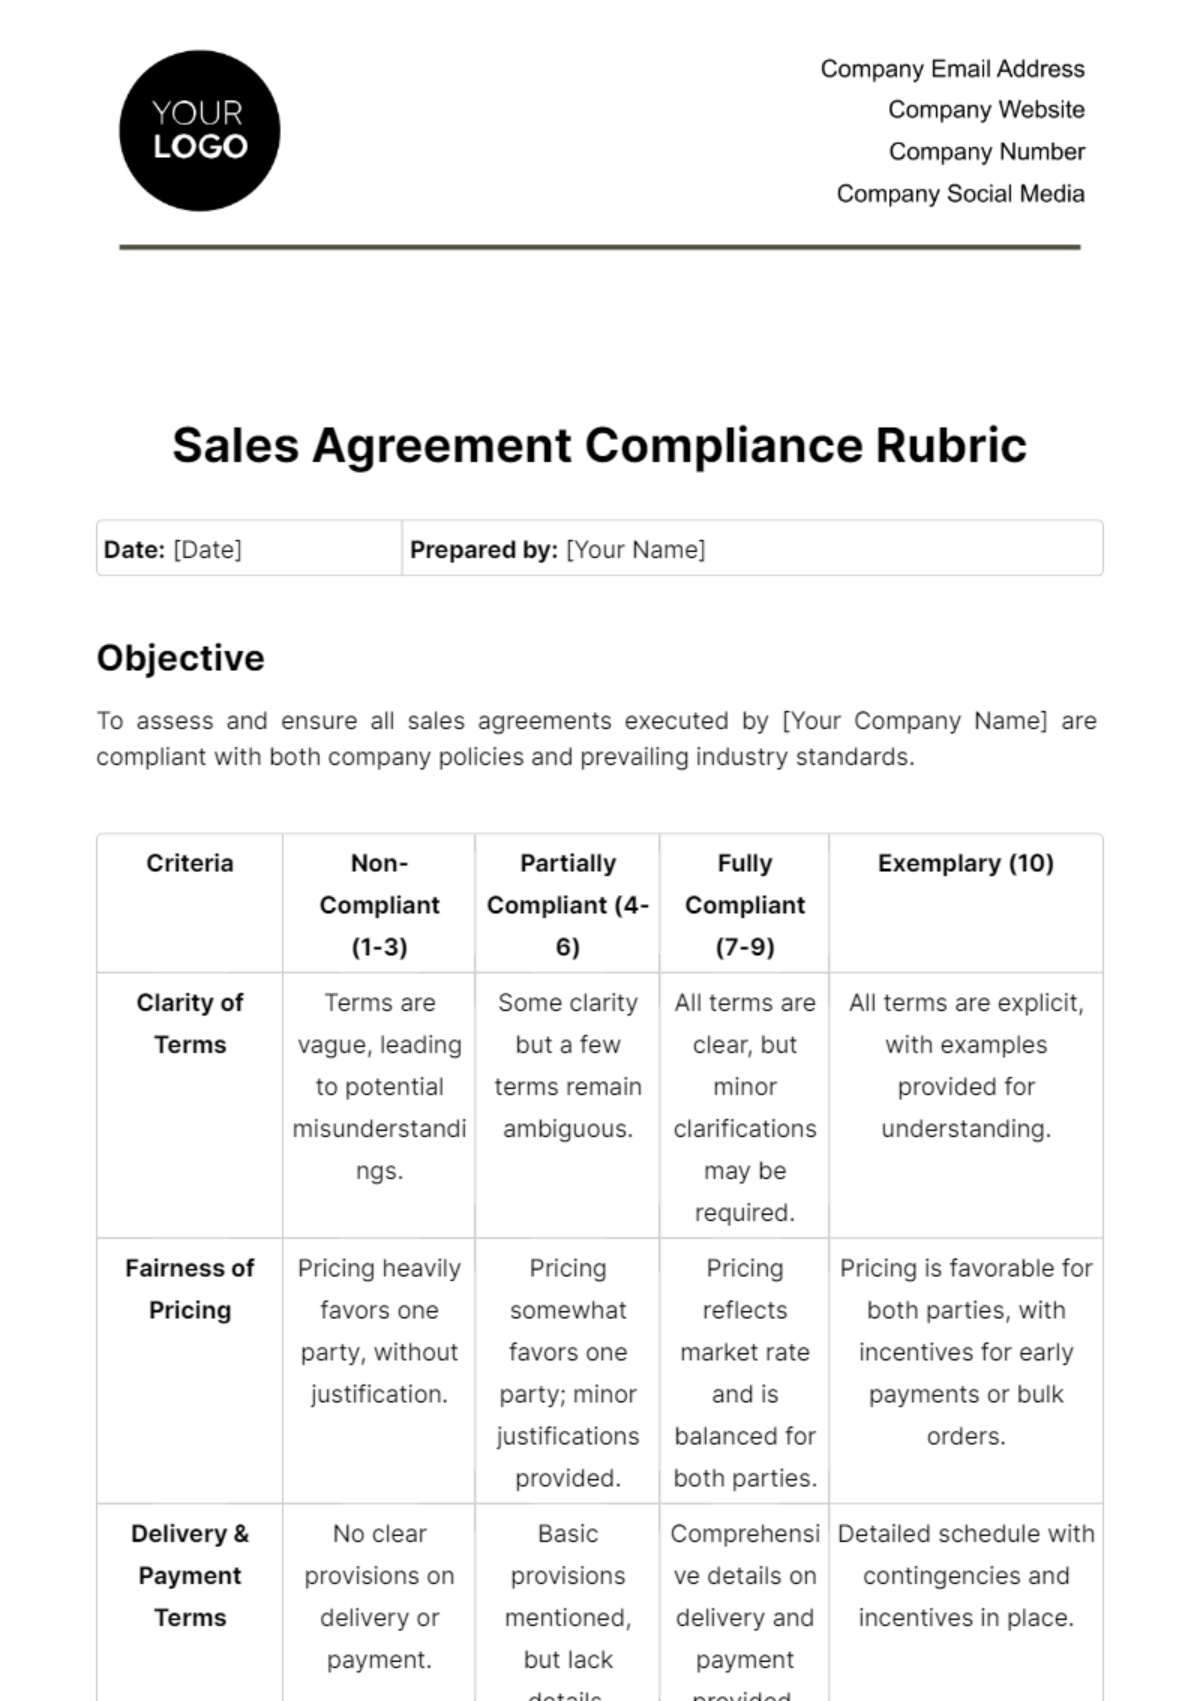 Sales Agreement Compliance Rubric Template